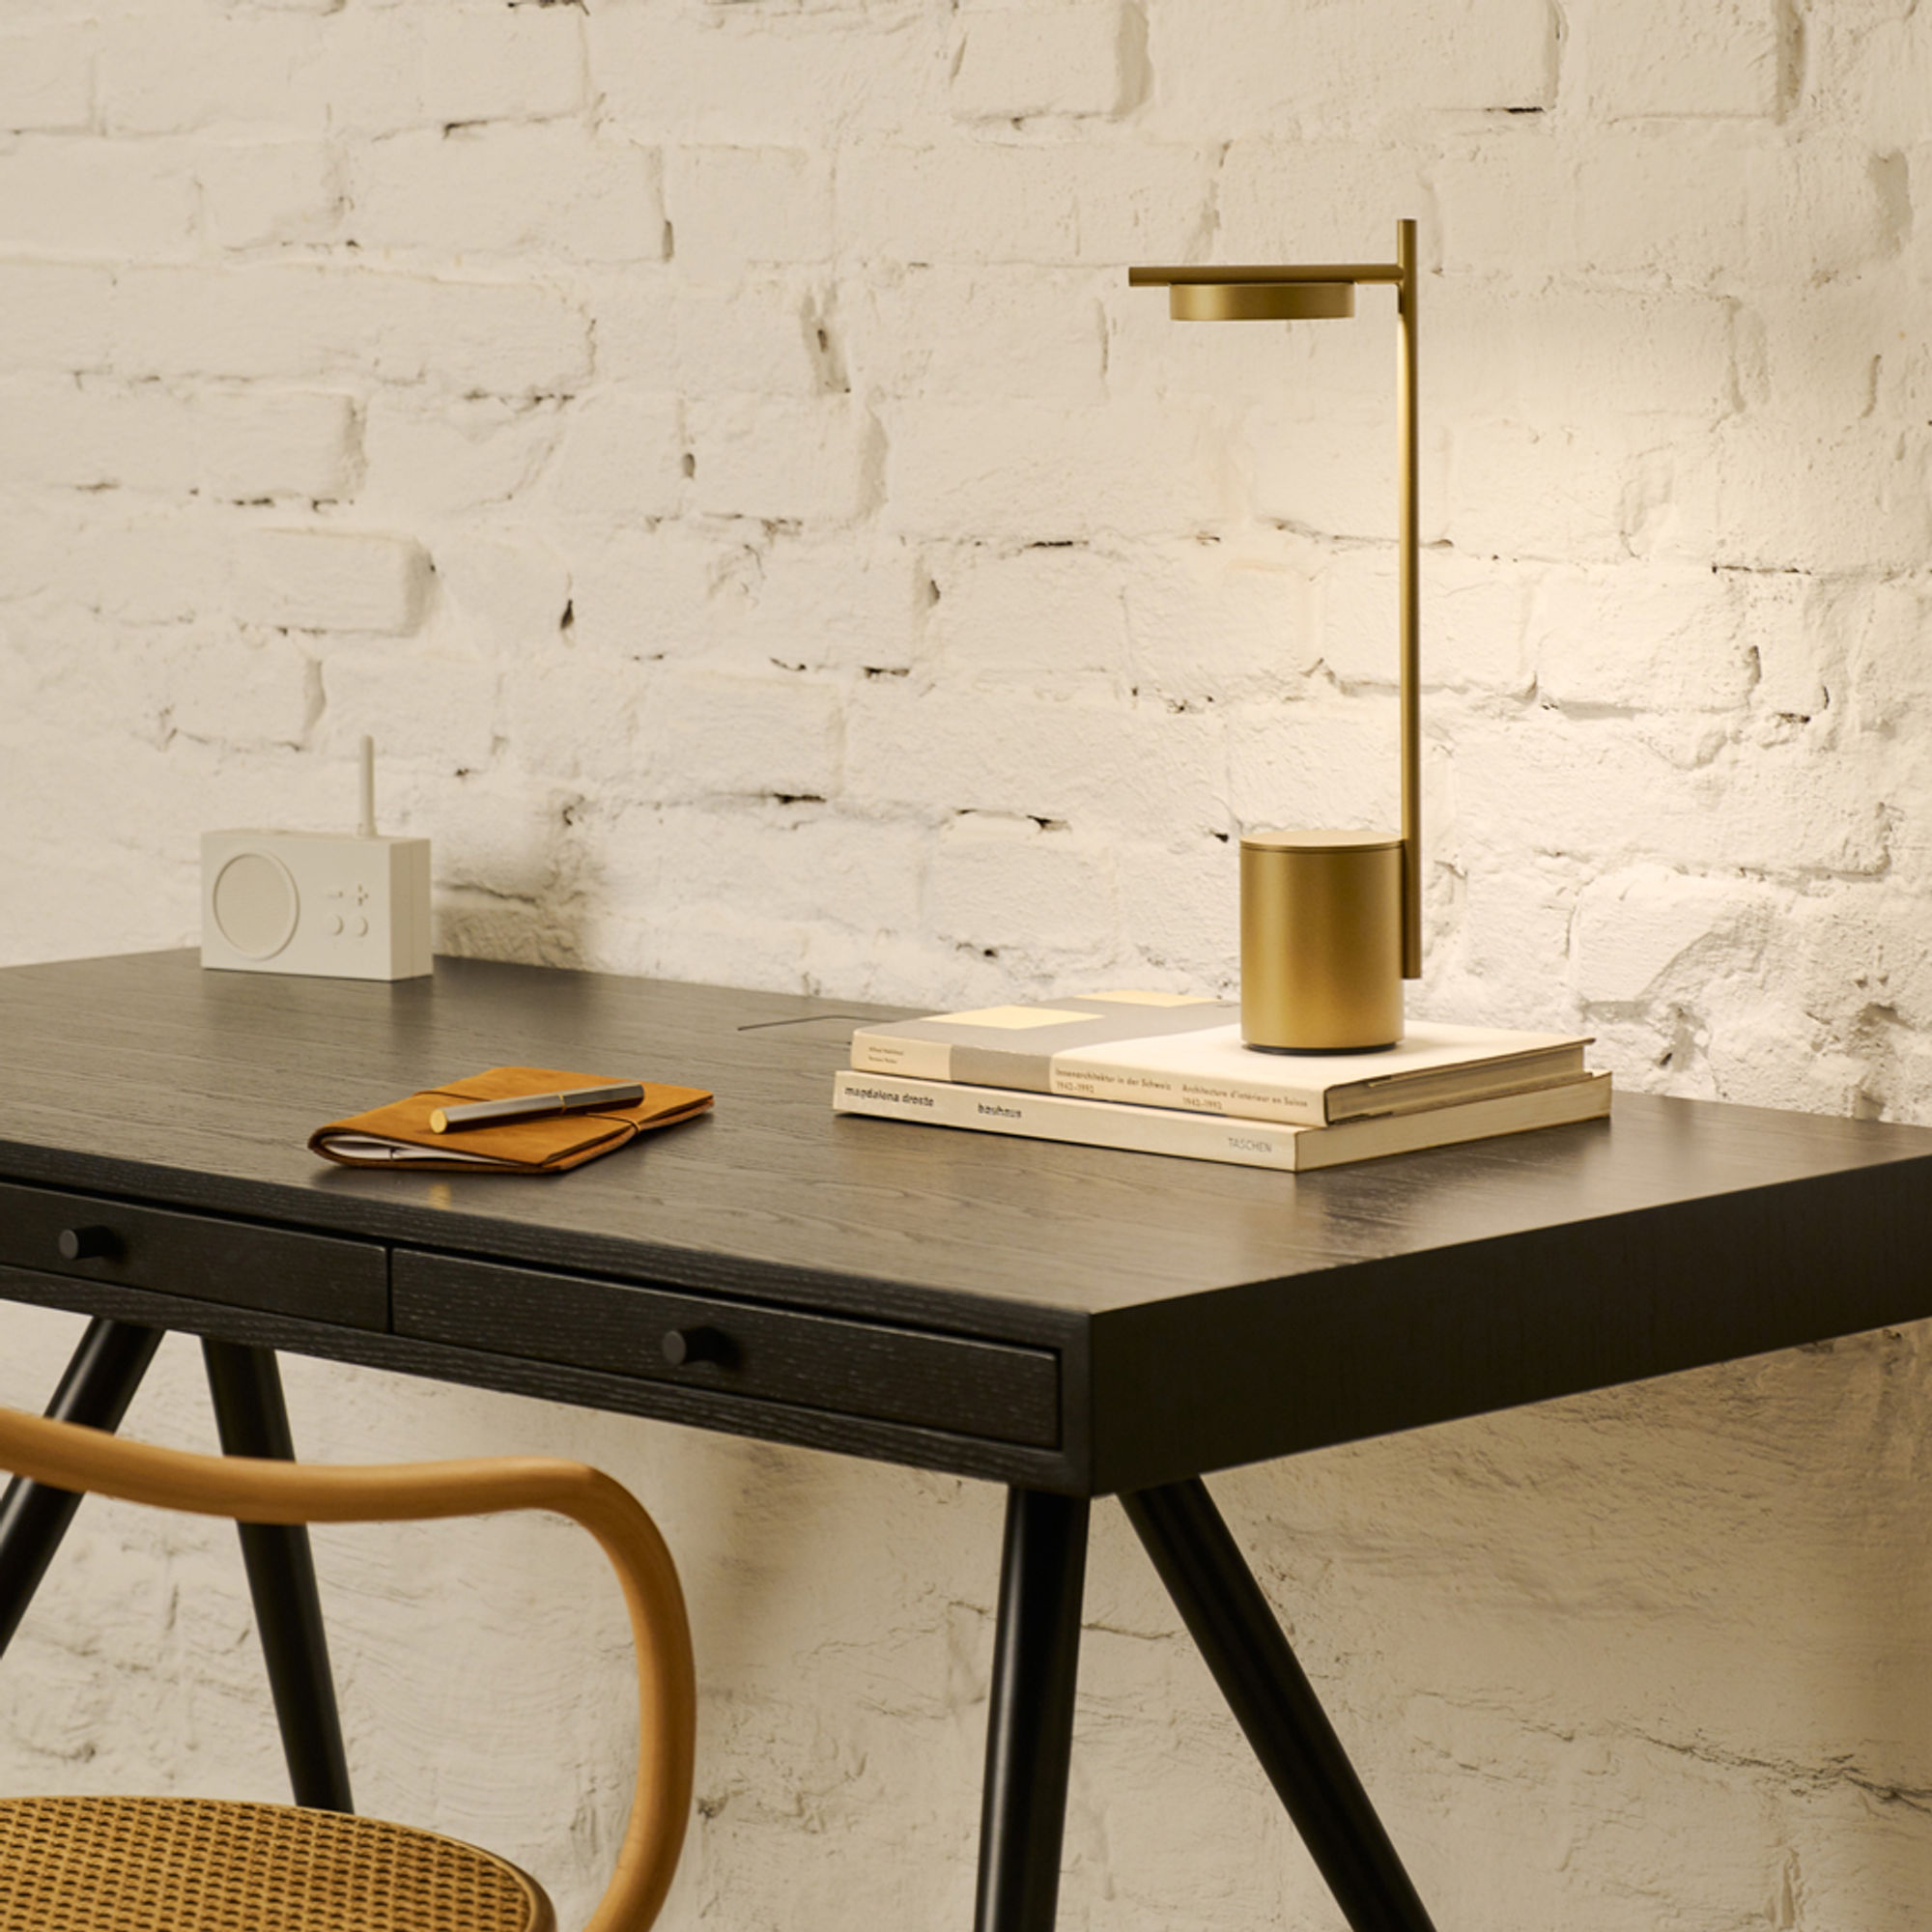 The Igram I Portable Table Lamp by Grupa 2